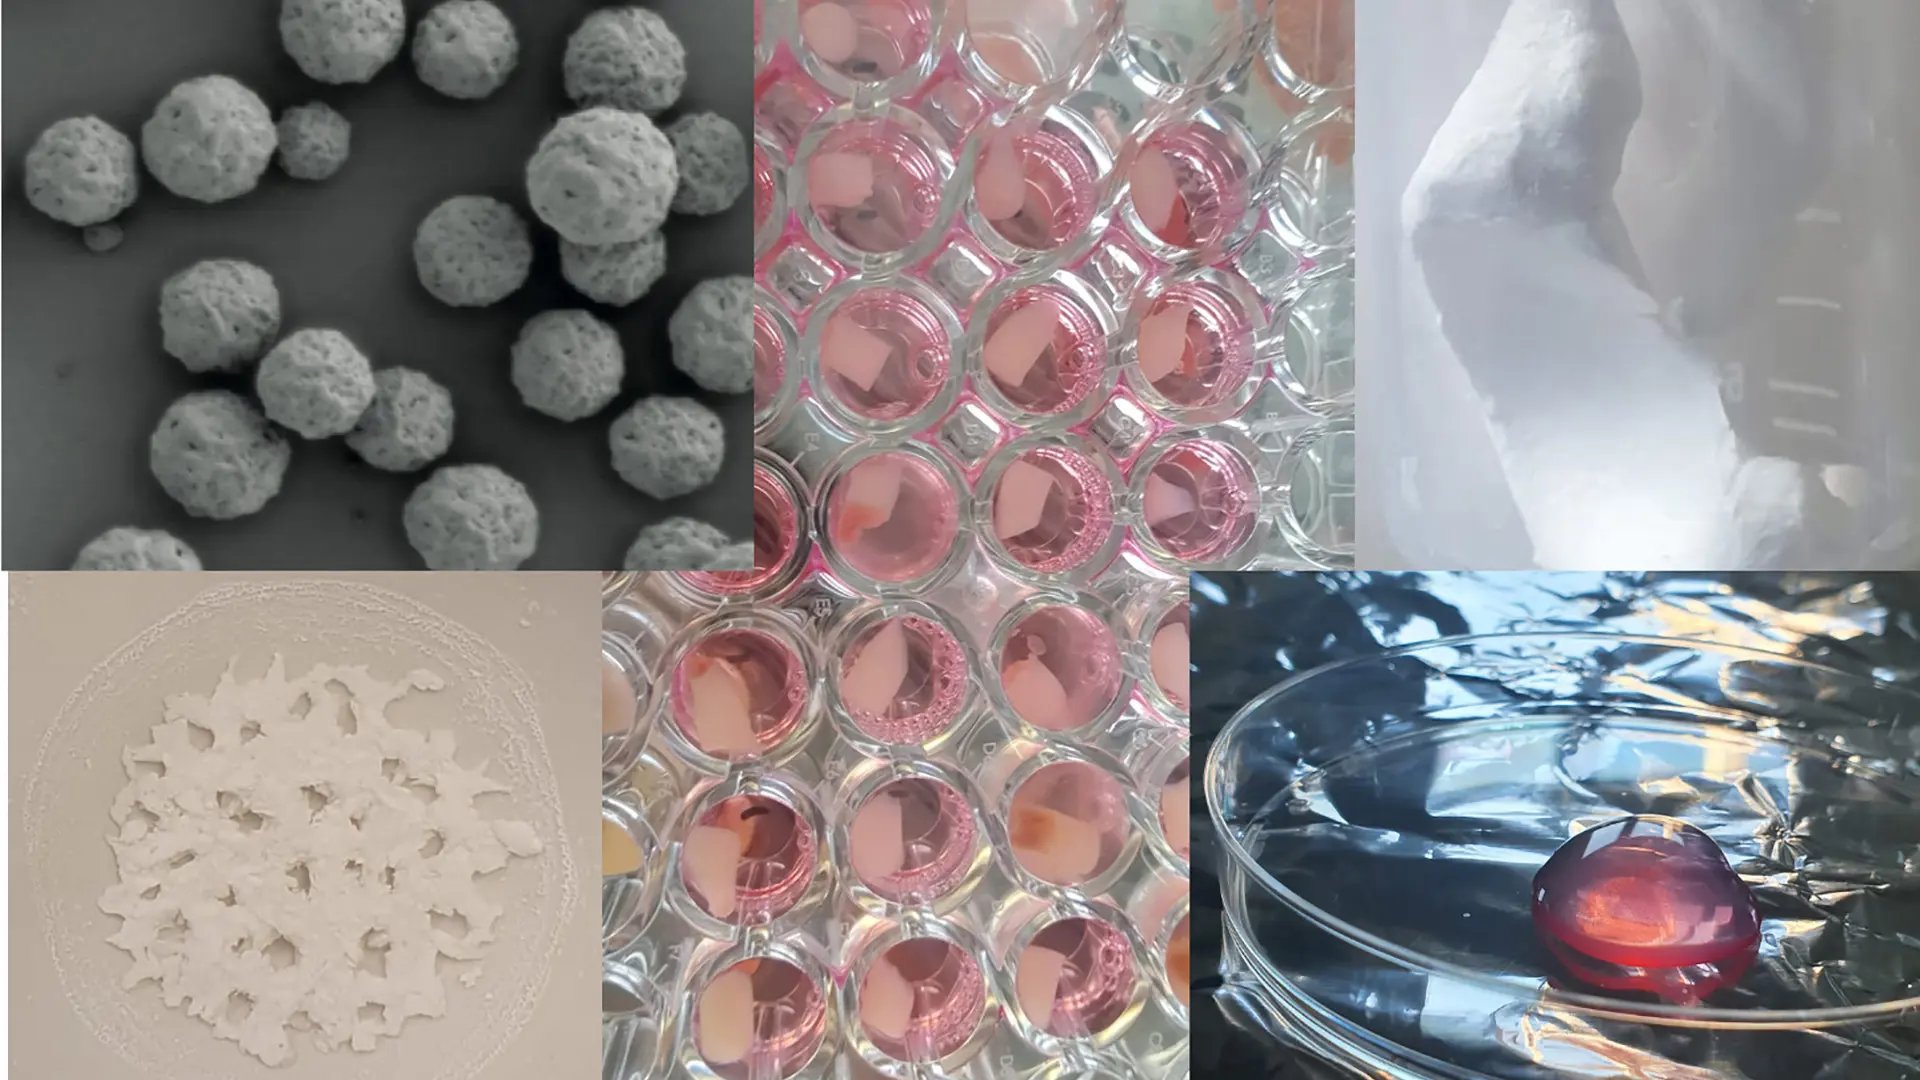 A collage showing different parts of the research groups laboratory experiments